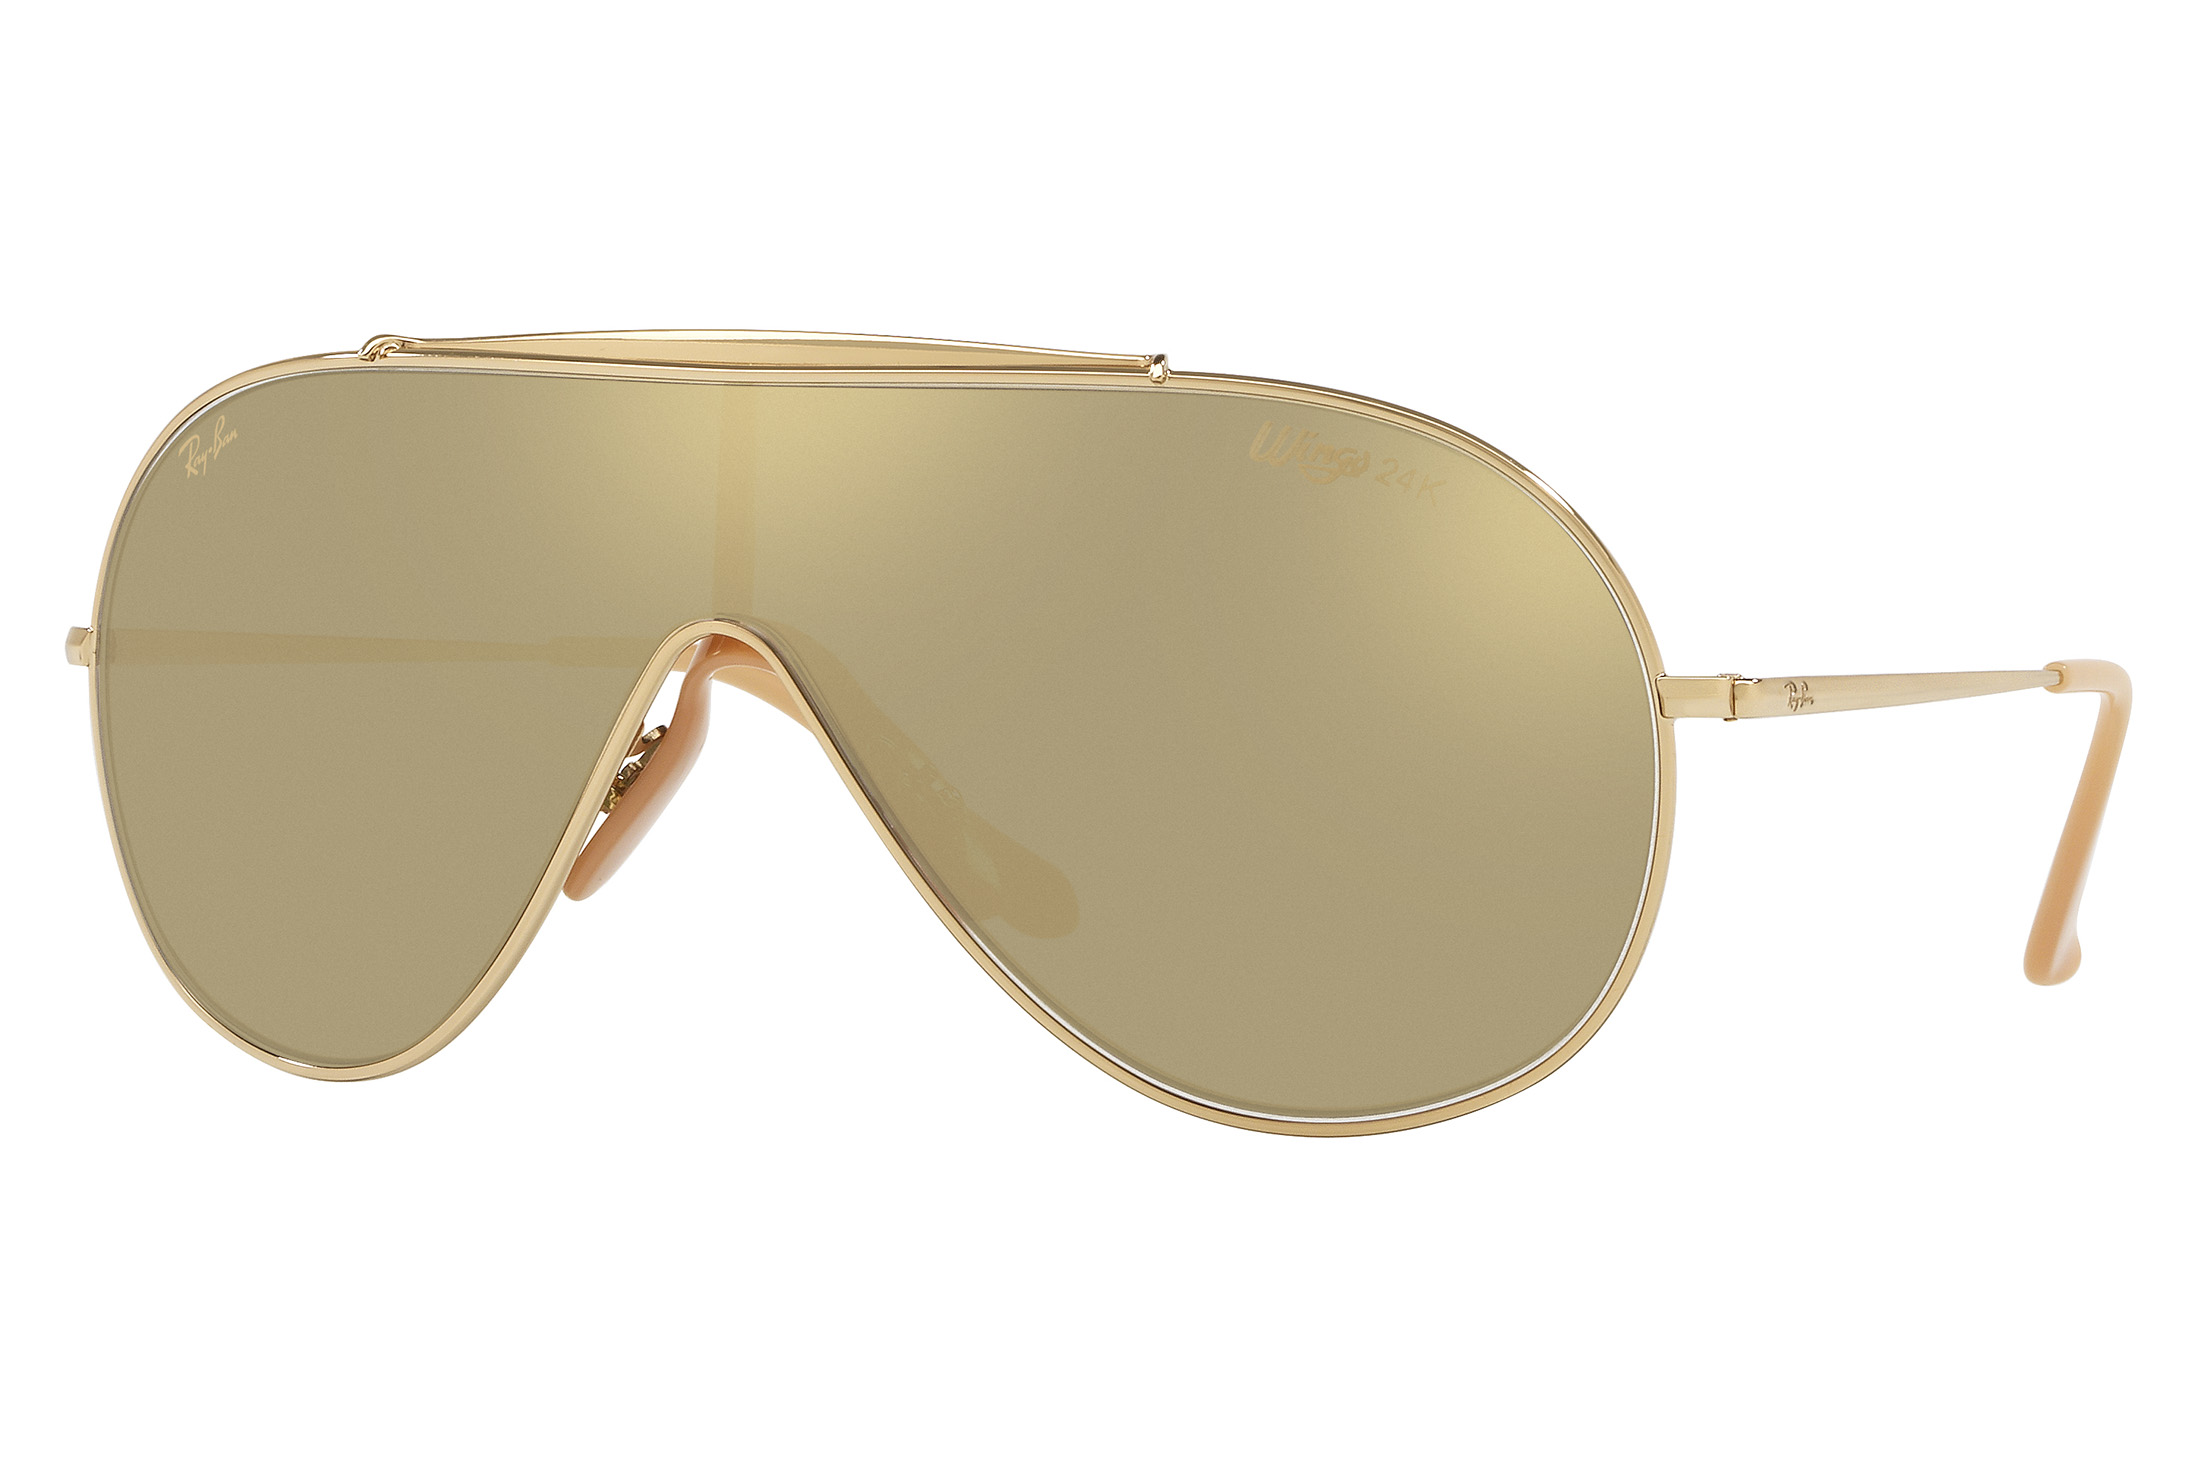 Ban Wings, the 24K Gold-Plated Aviator Sunglasses for - Bloomberg